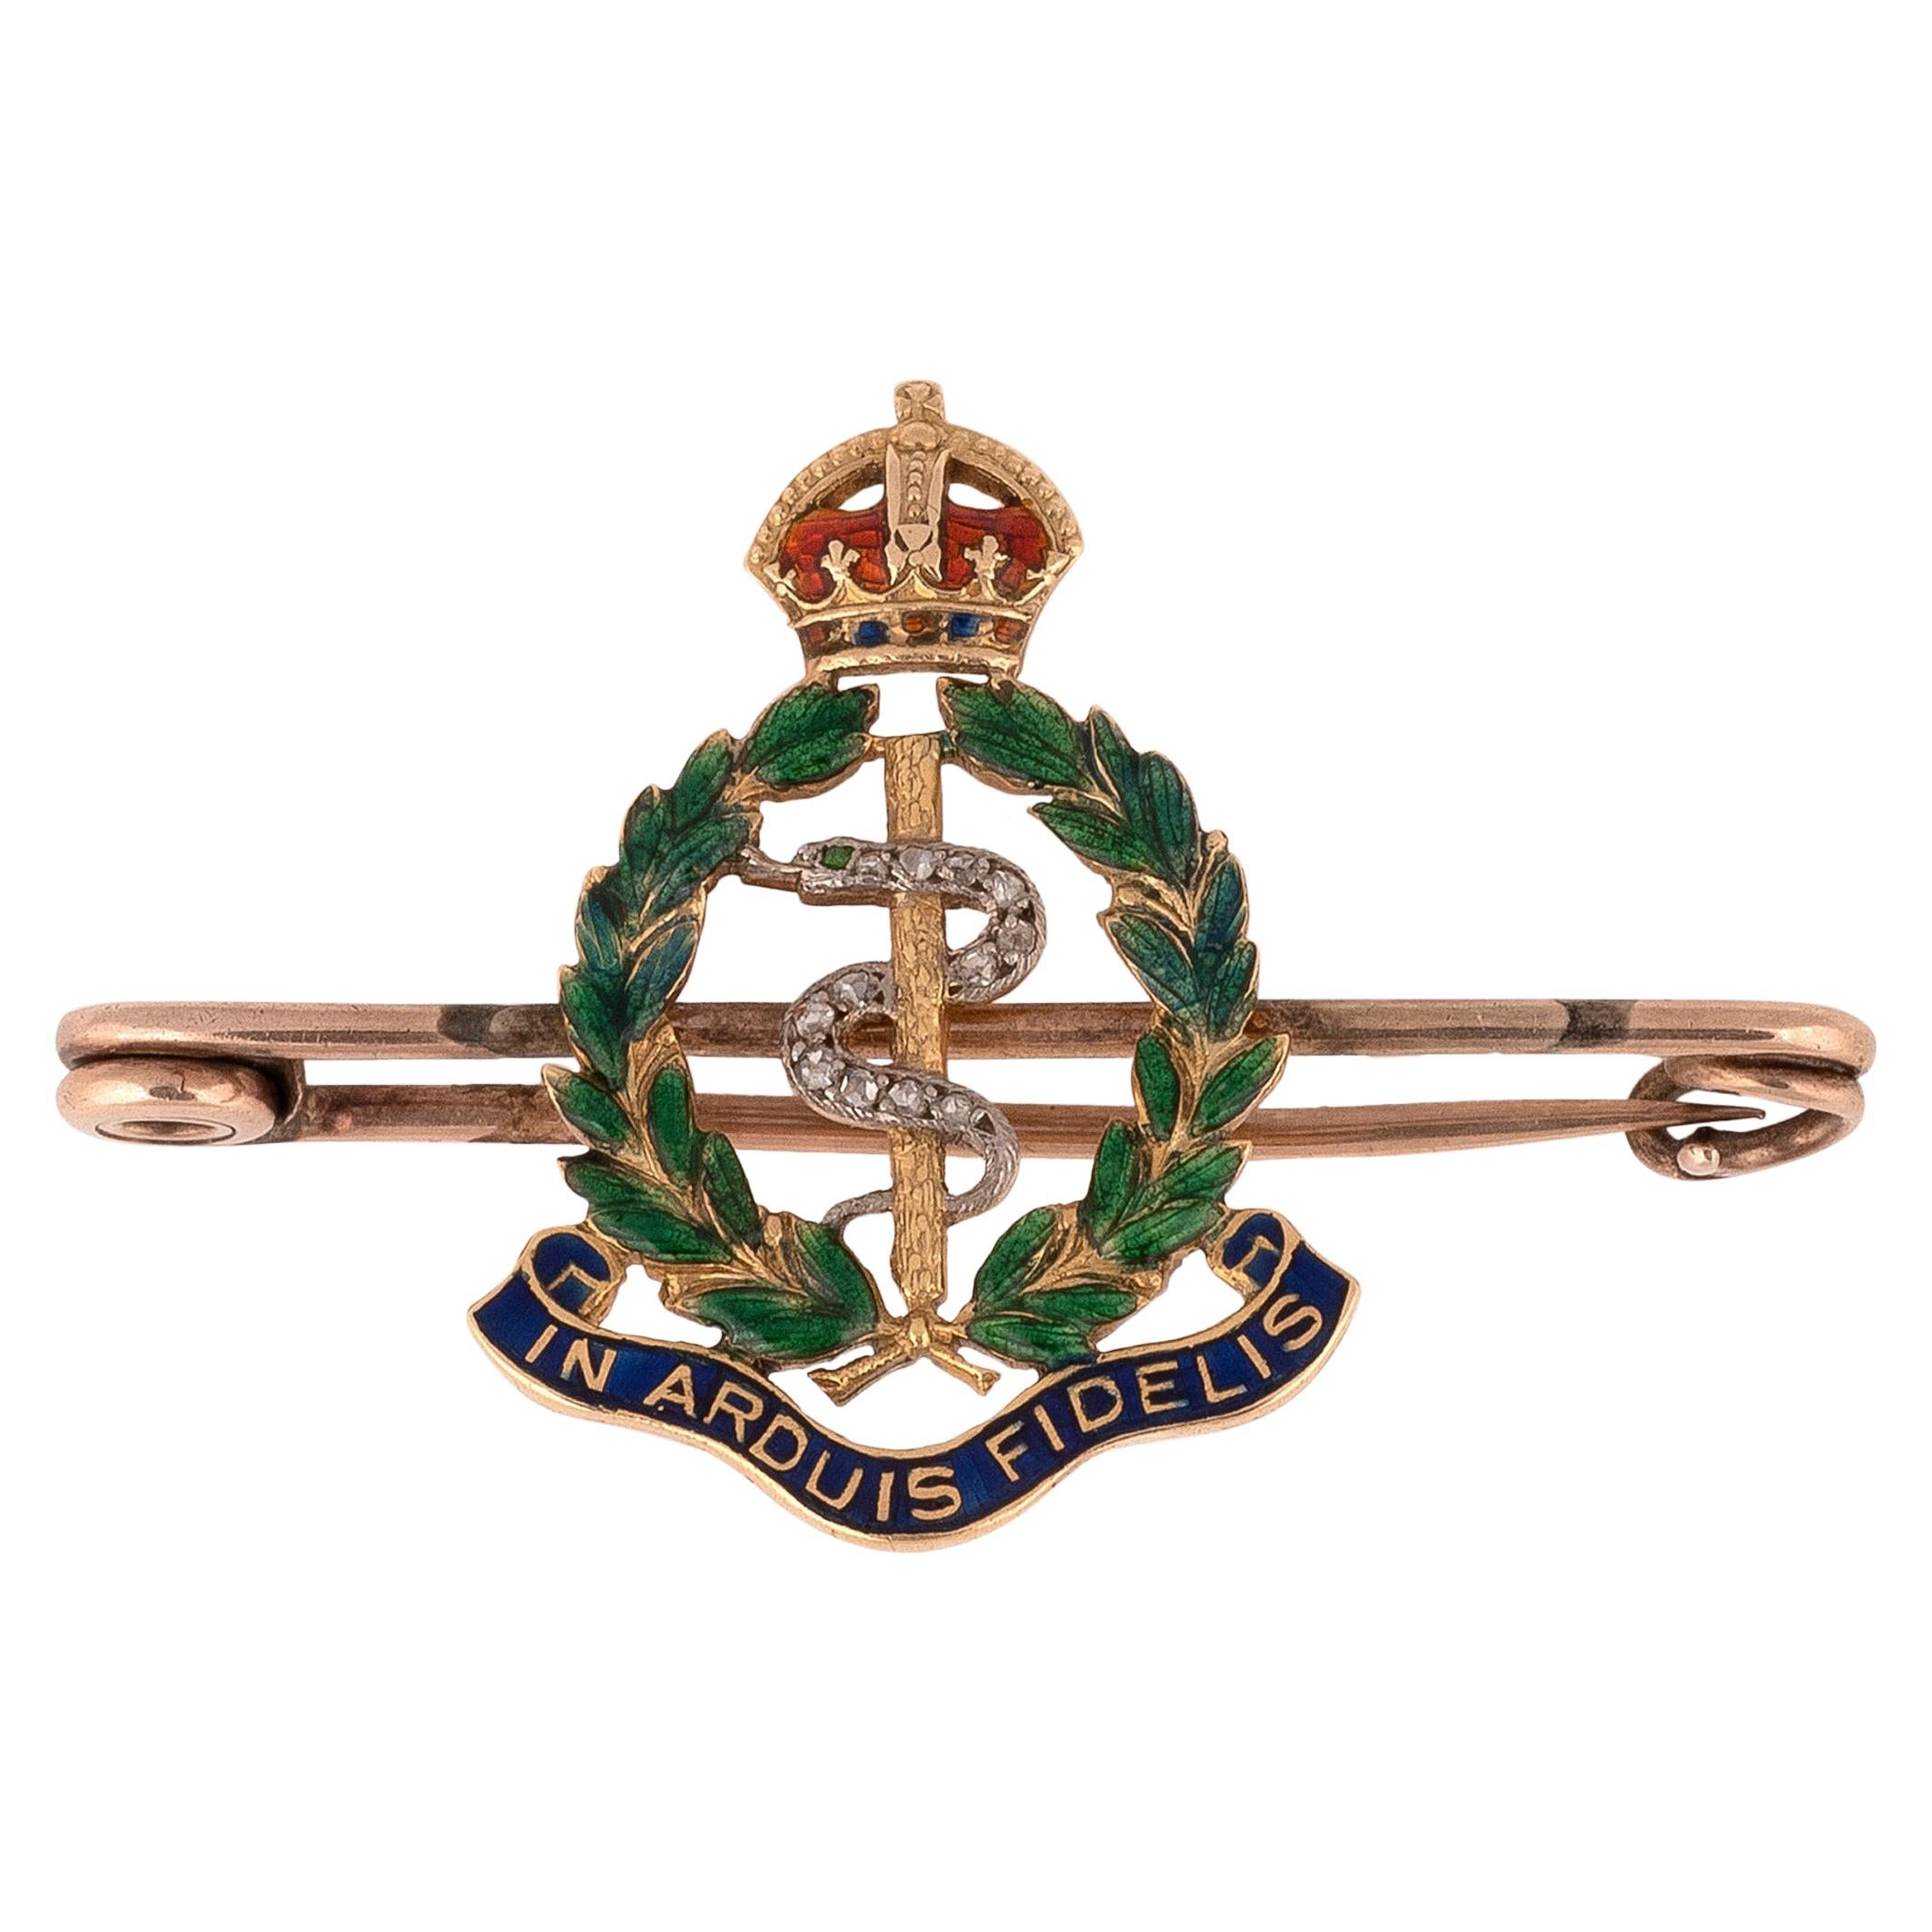 Regimental Sweetheart Brooch for The Royal Army Medical Corps